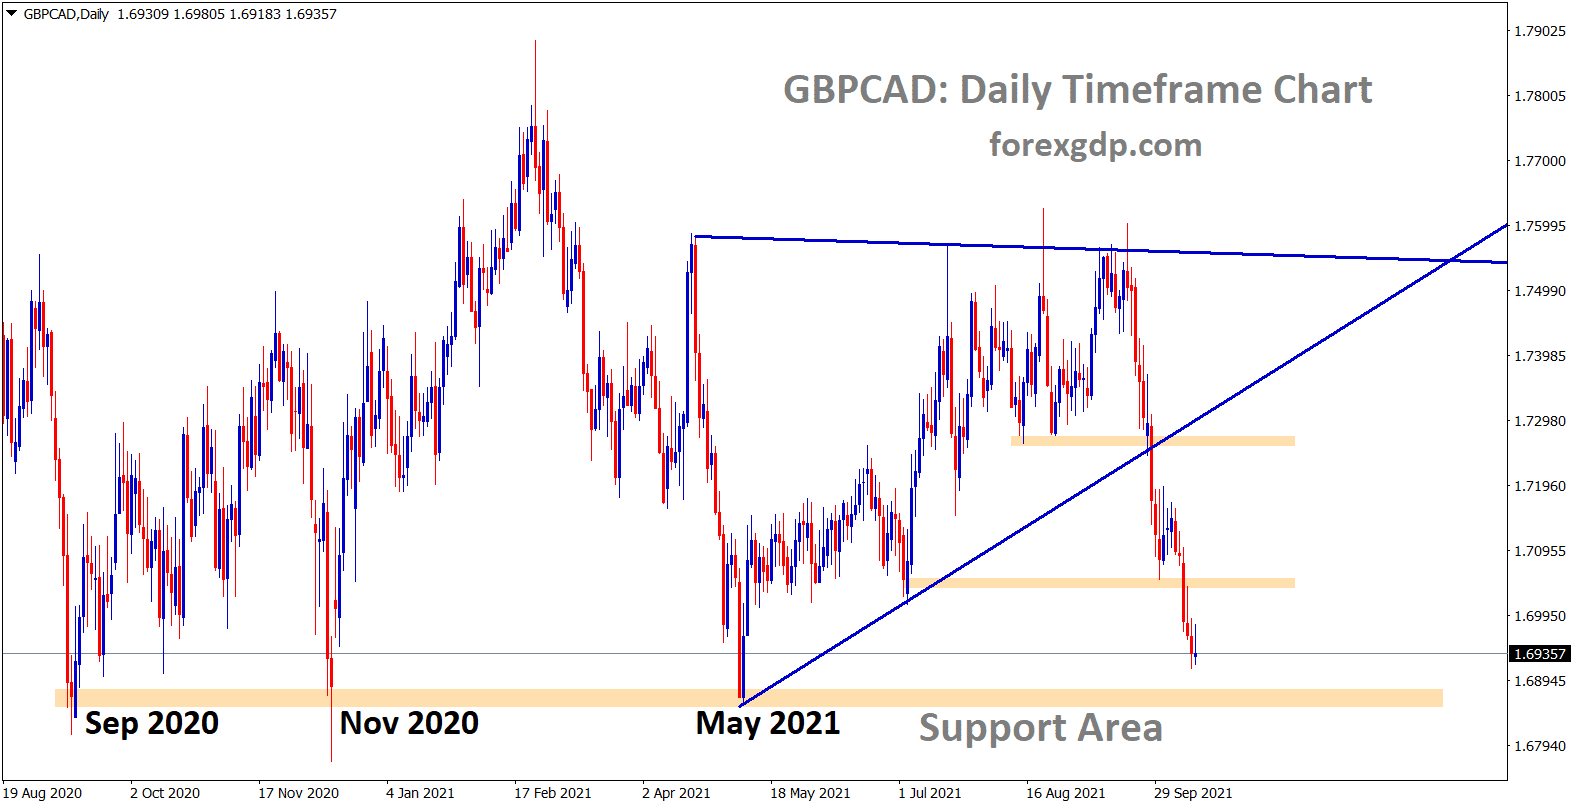 GBPCAD is going to reach the major support area